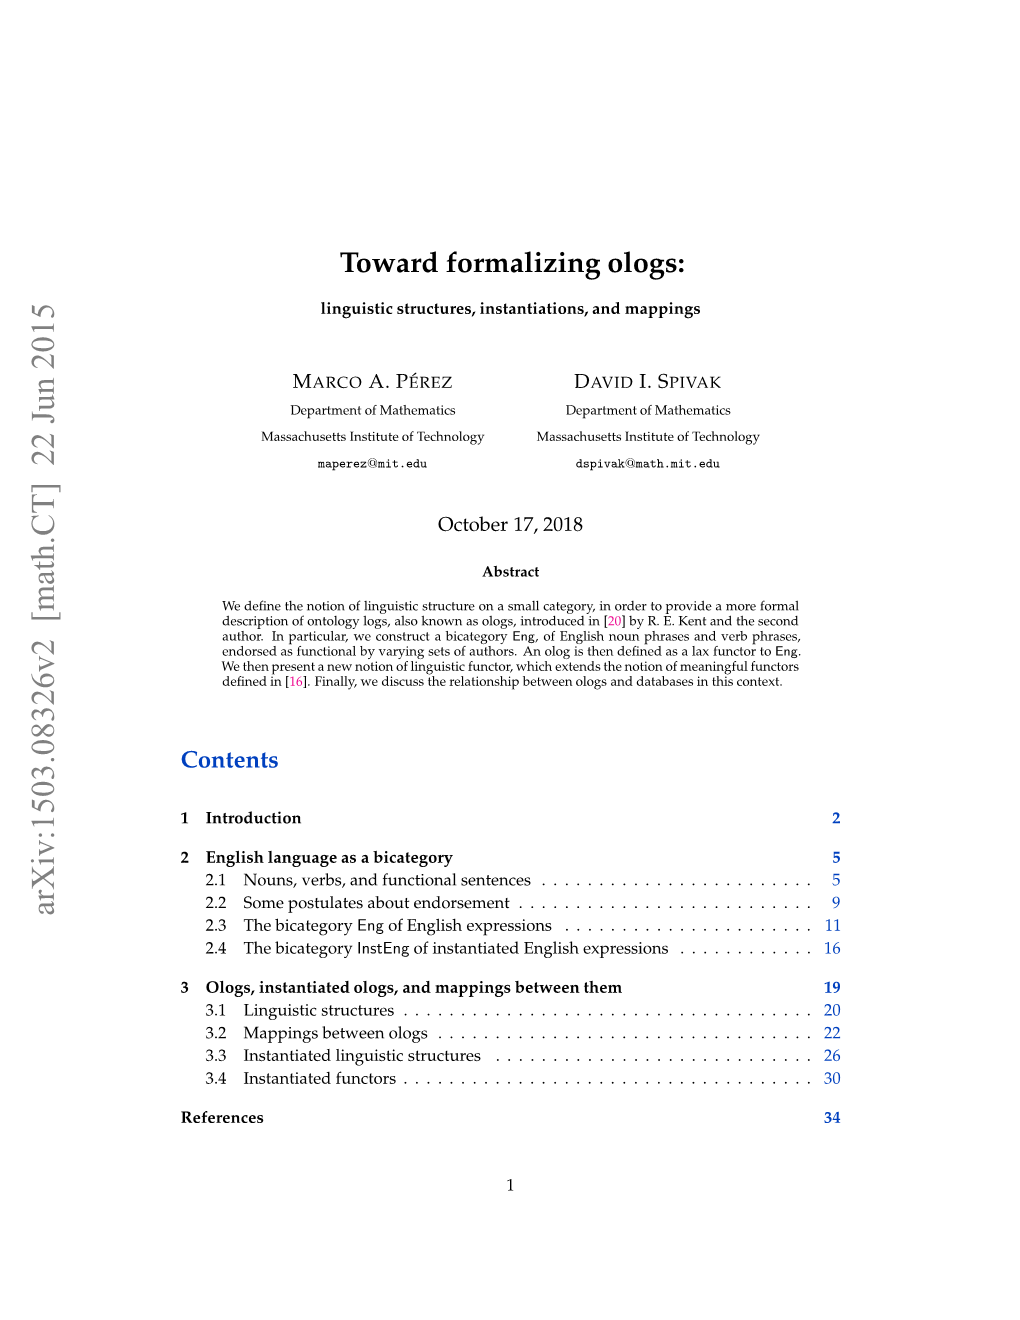 Toward Formalizing Ologs: Linguistic Structures, Instantiations, And